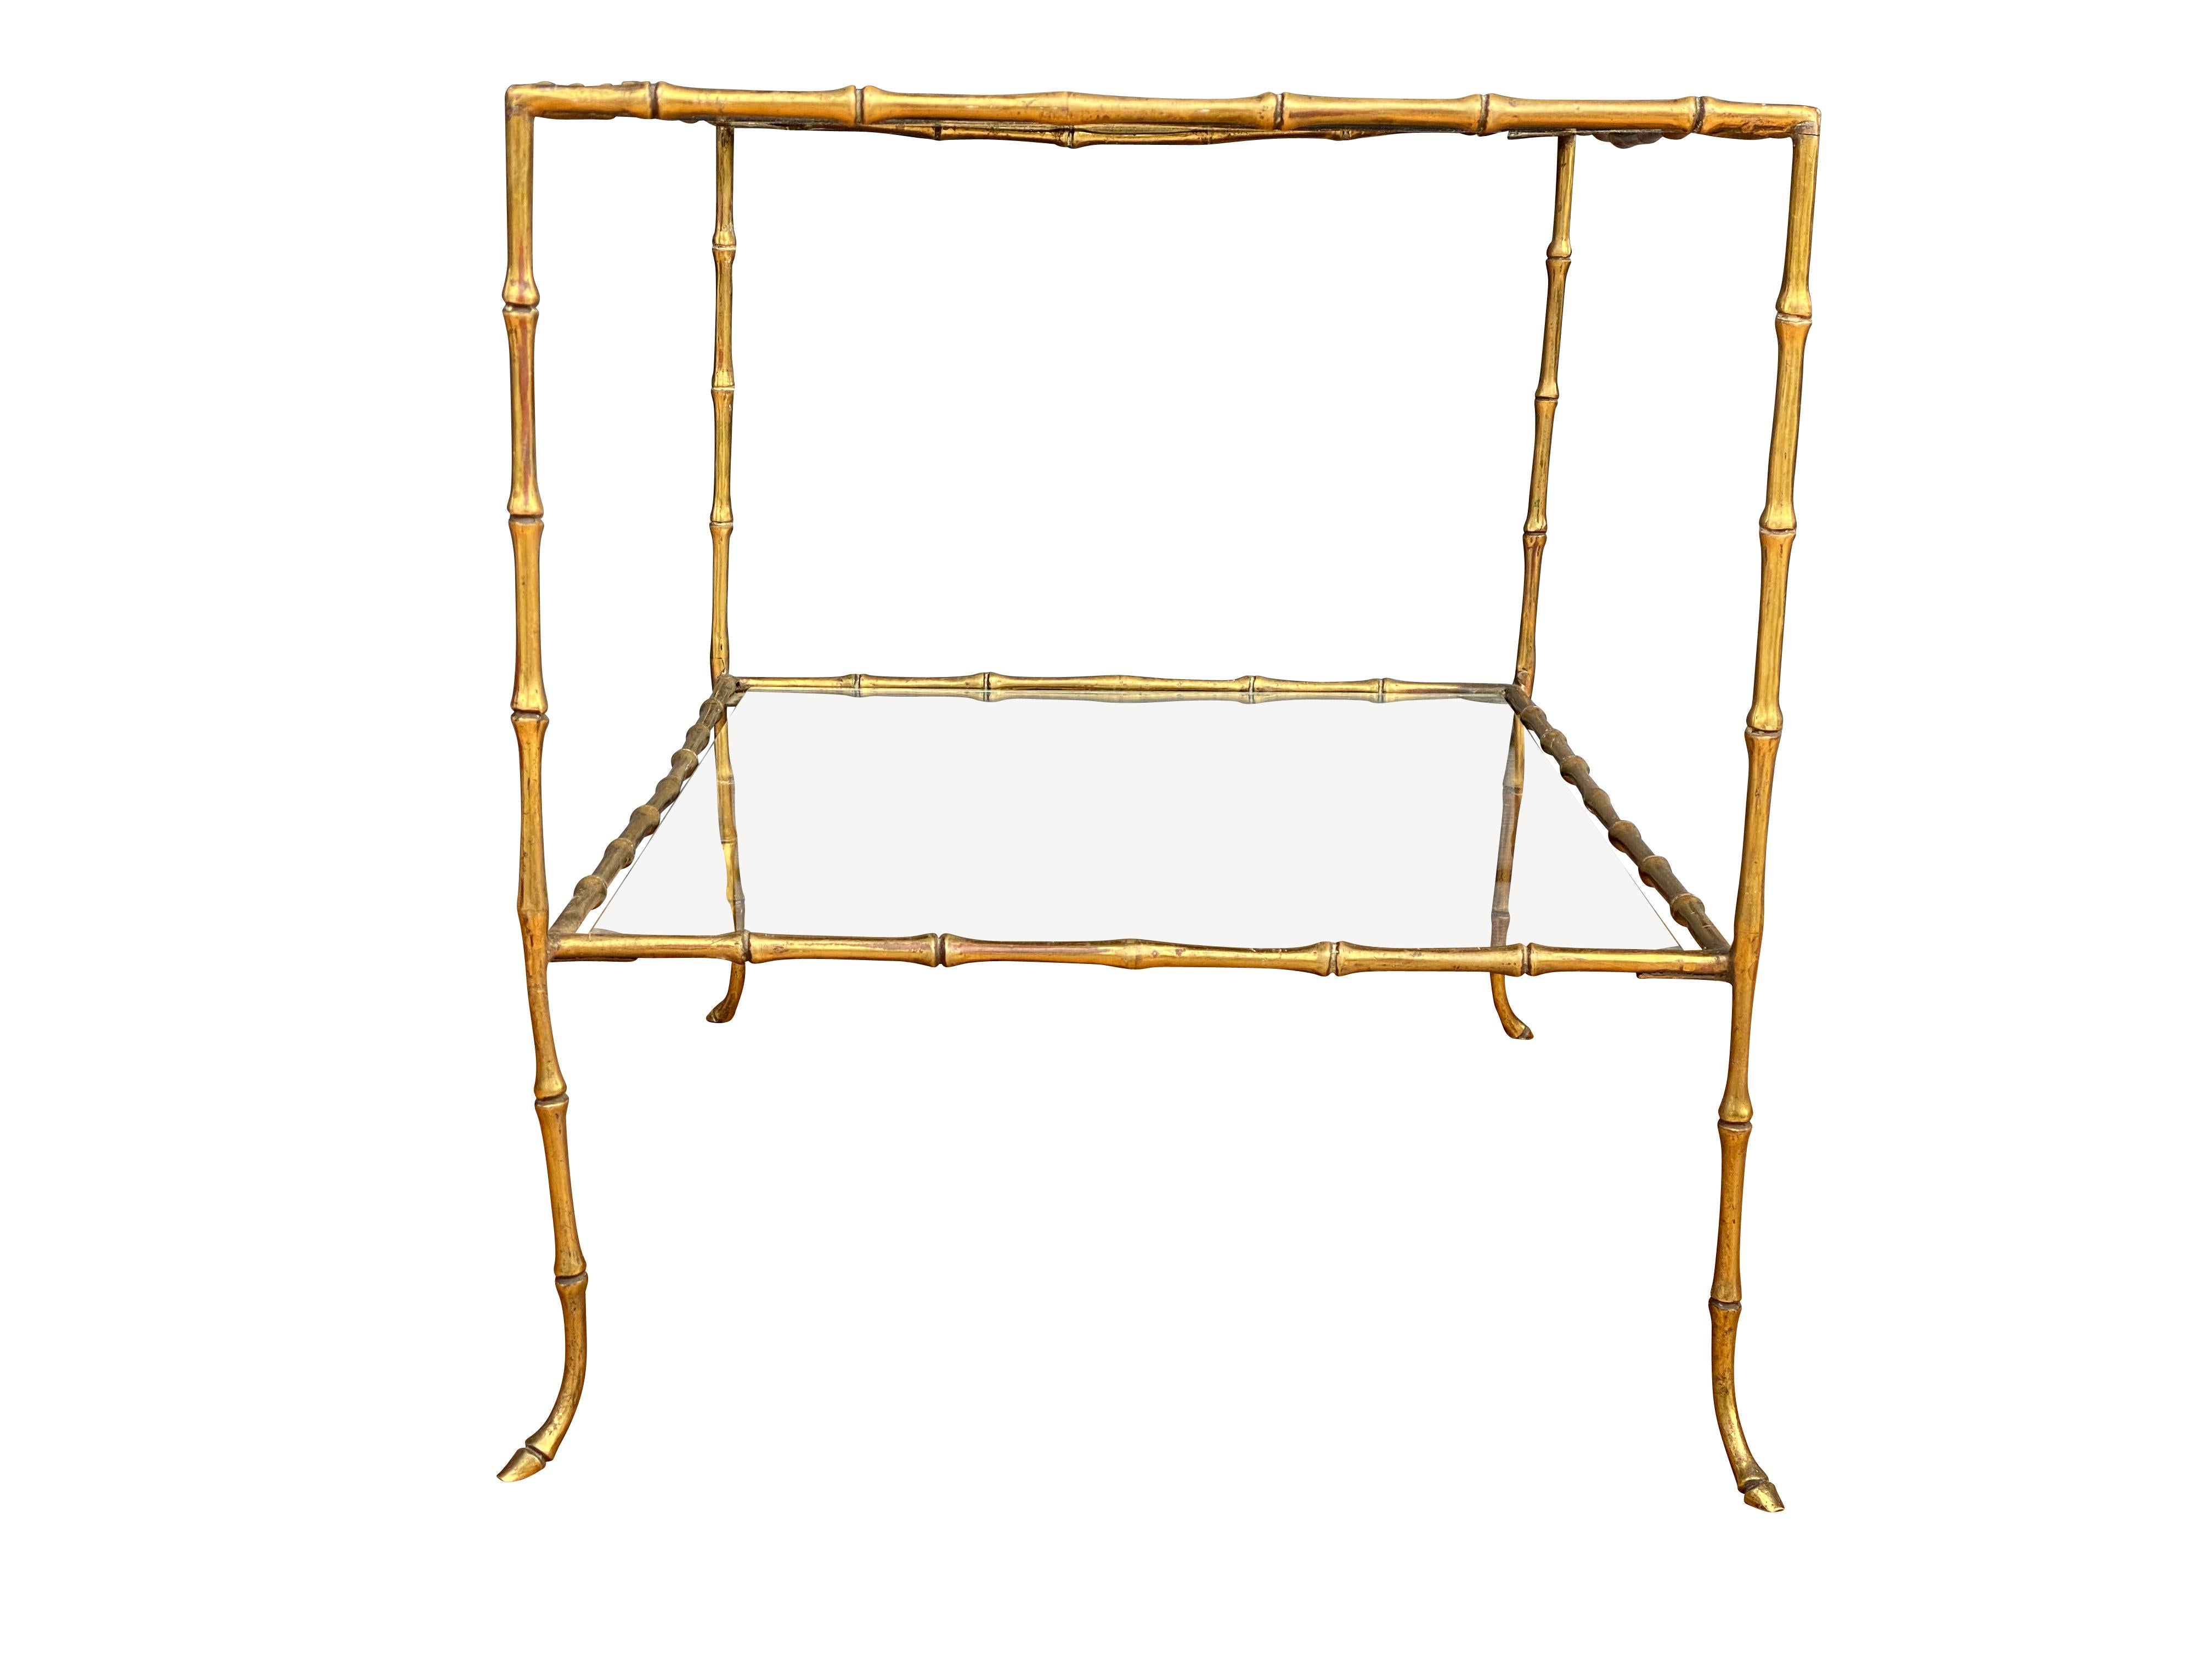 European Faux Bamboo Brass Two-Tier Table Attributed to Maison Bagues